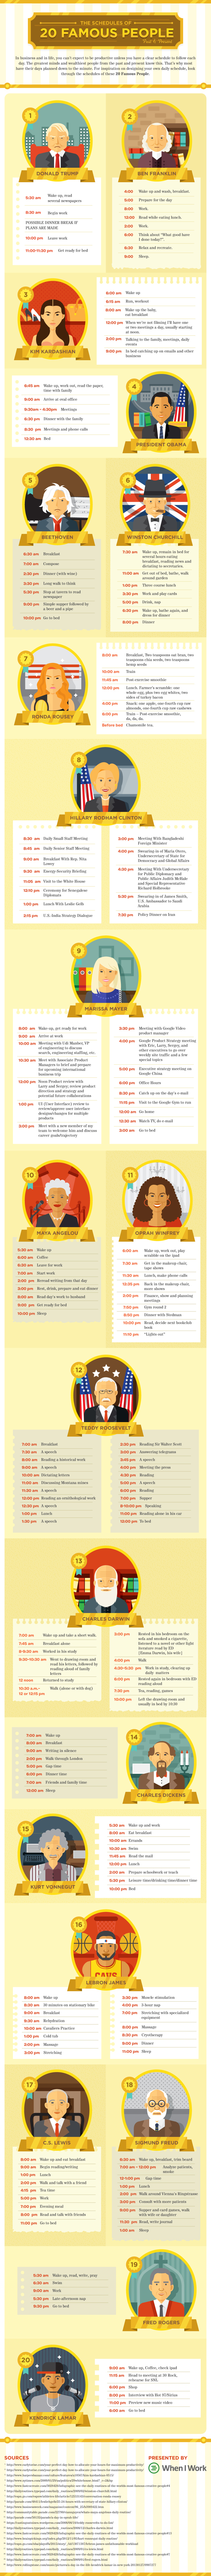 The Schedules of 20 Famous People